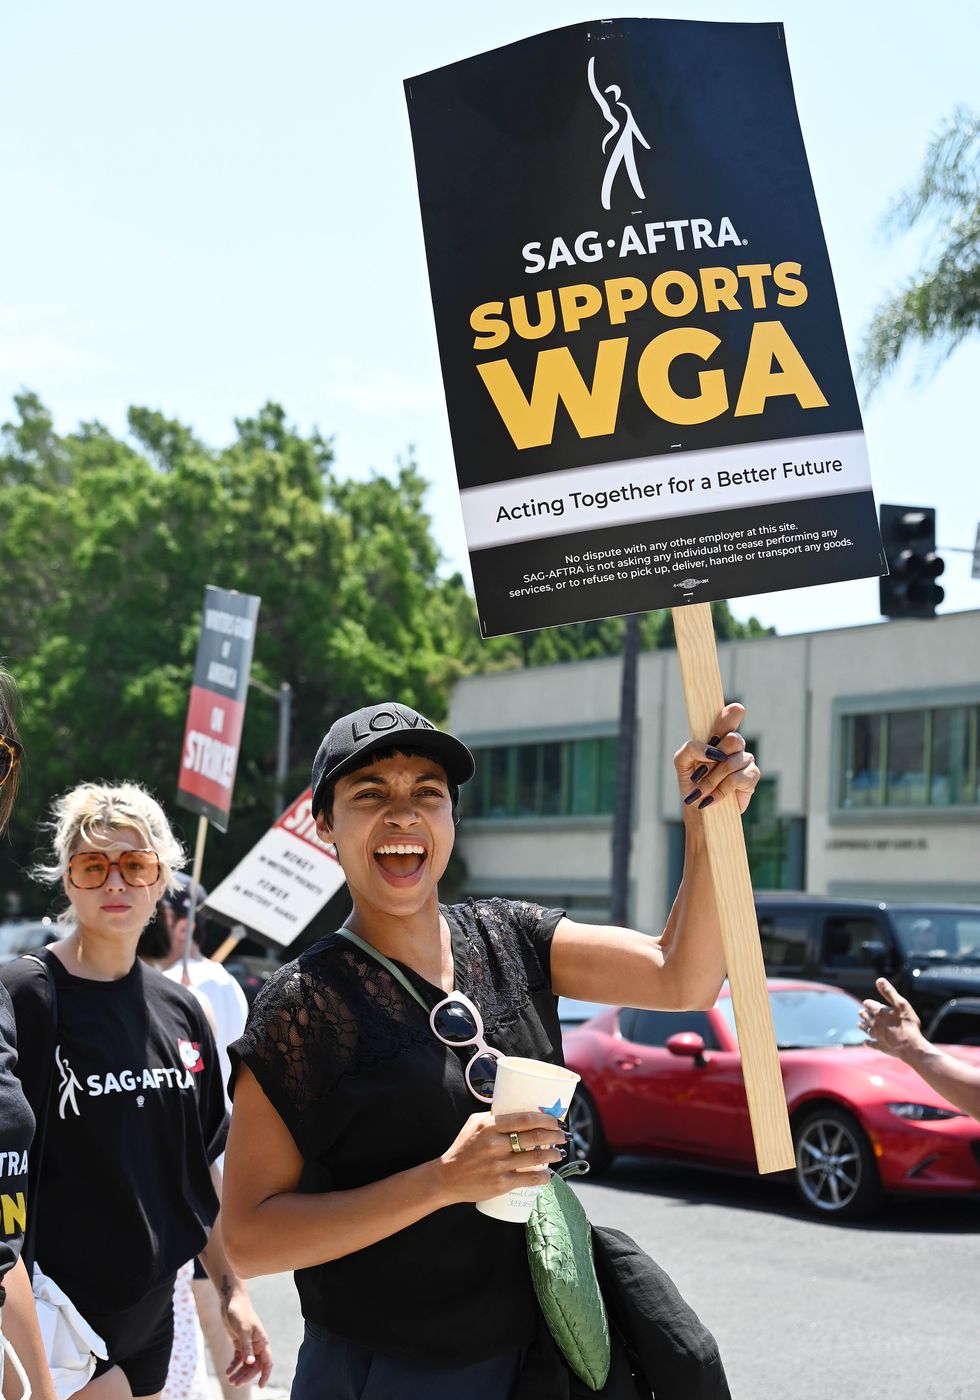 rosario dawson walks the picket line on day 5 in support of the sag aftra and wga strike at paramount pictures studio on july 17, 2023 in los angeles, california photo by gilbert floresvariety via getty images